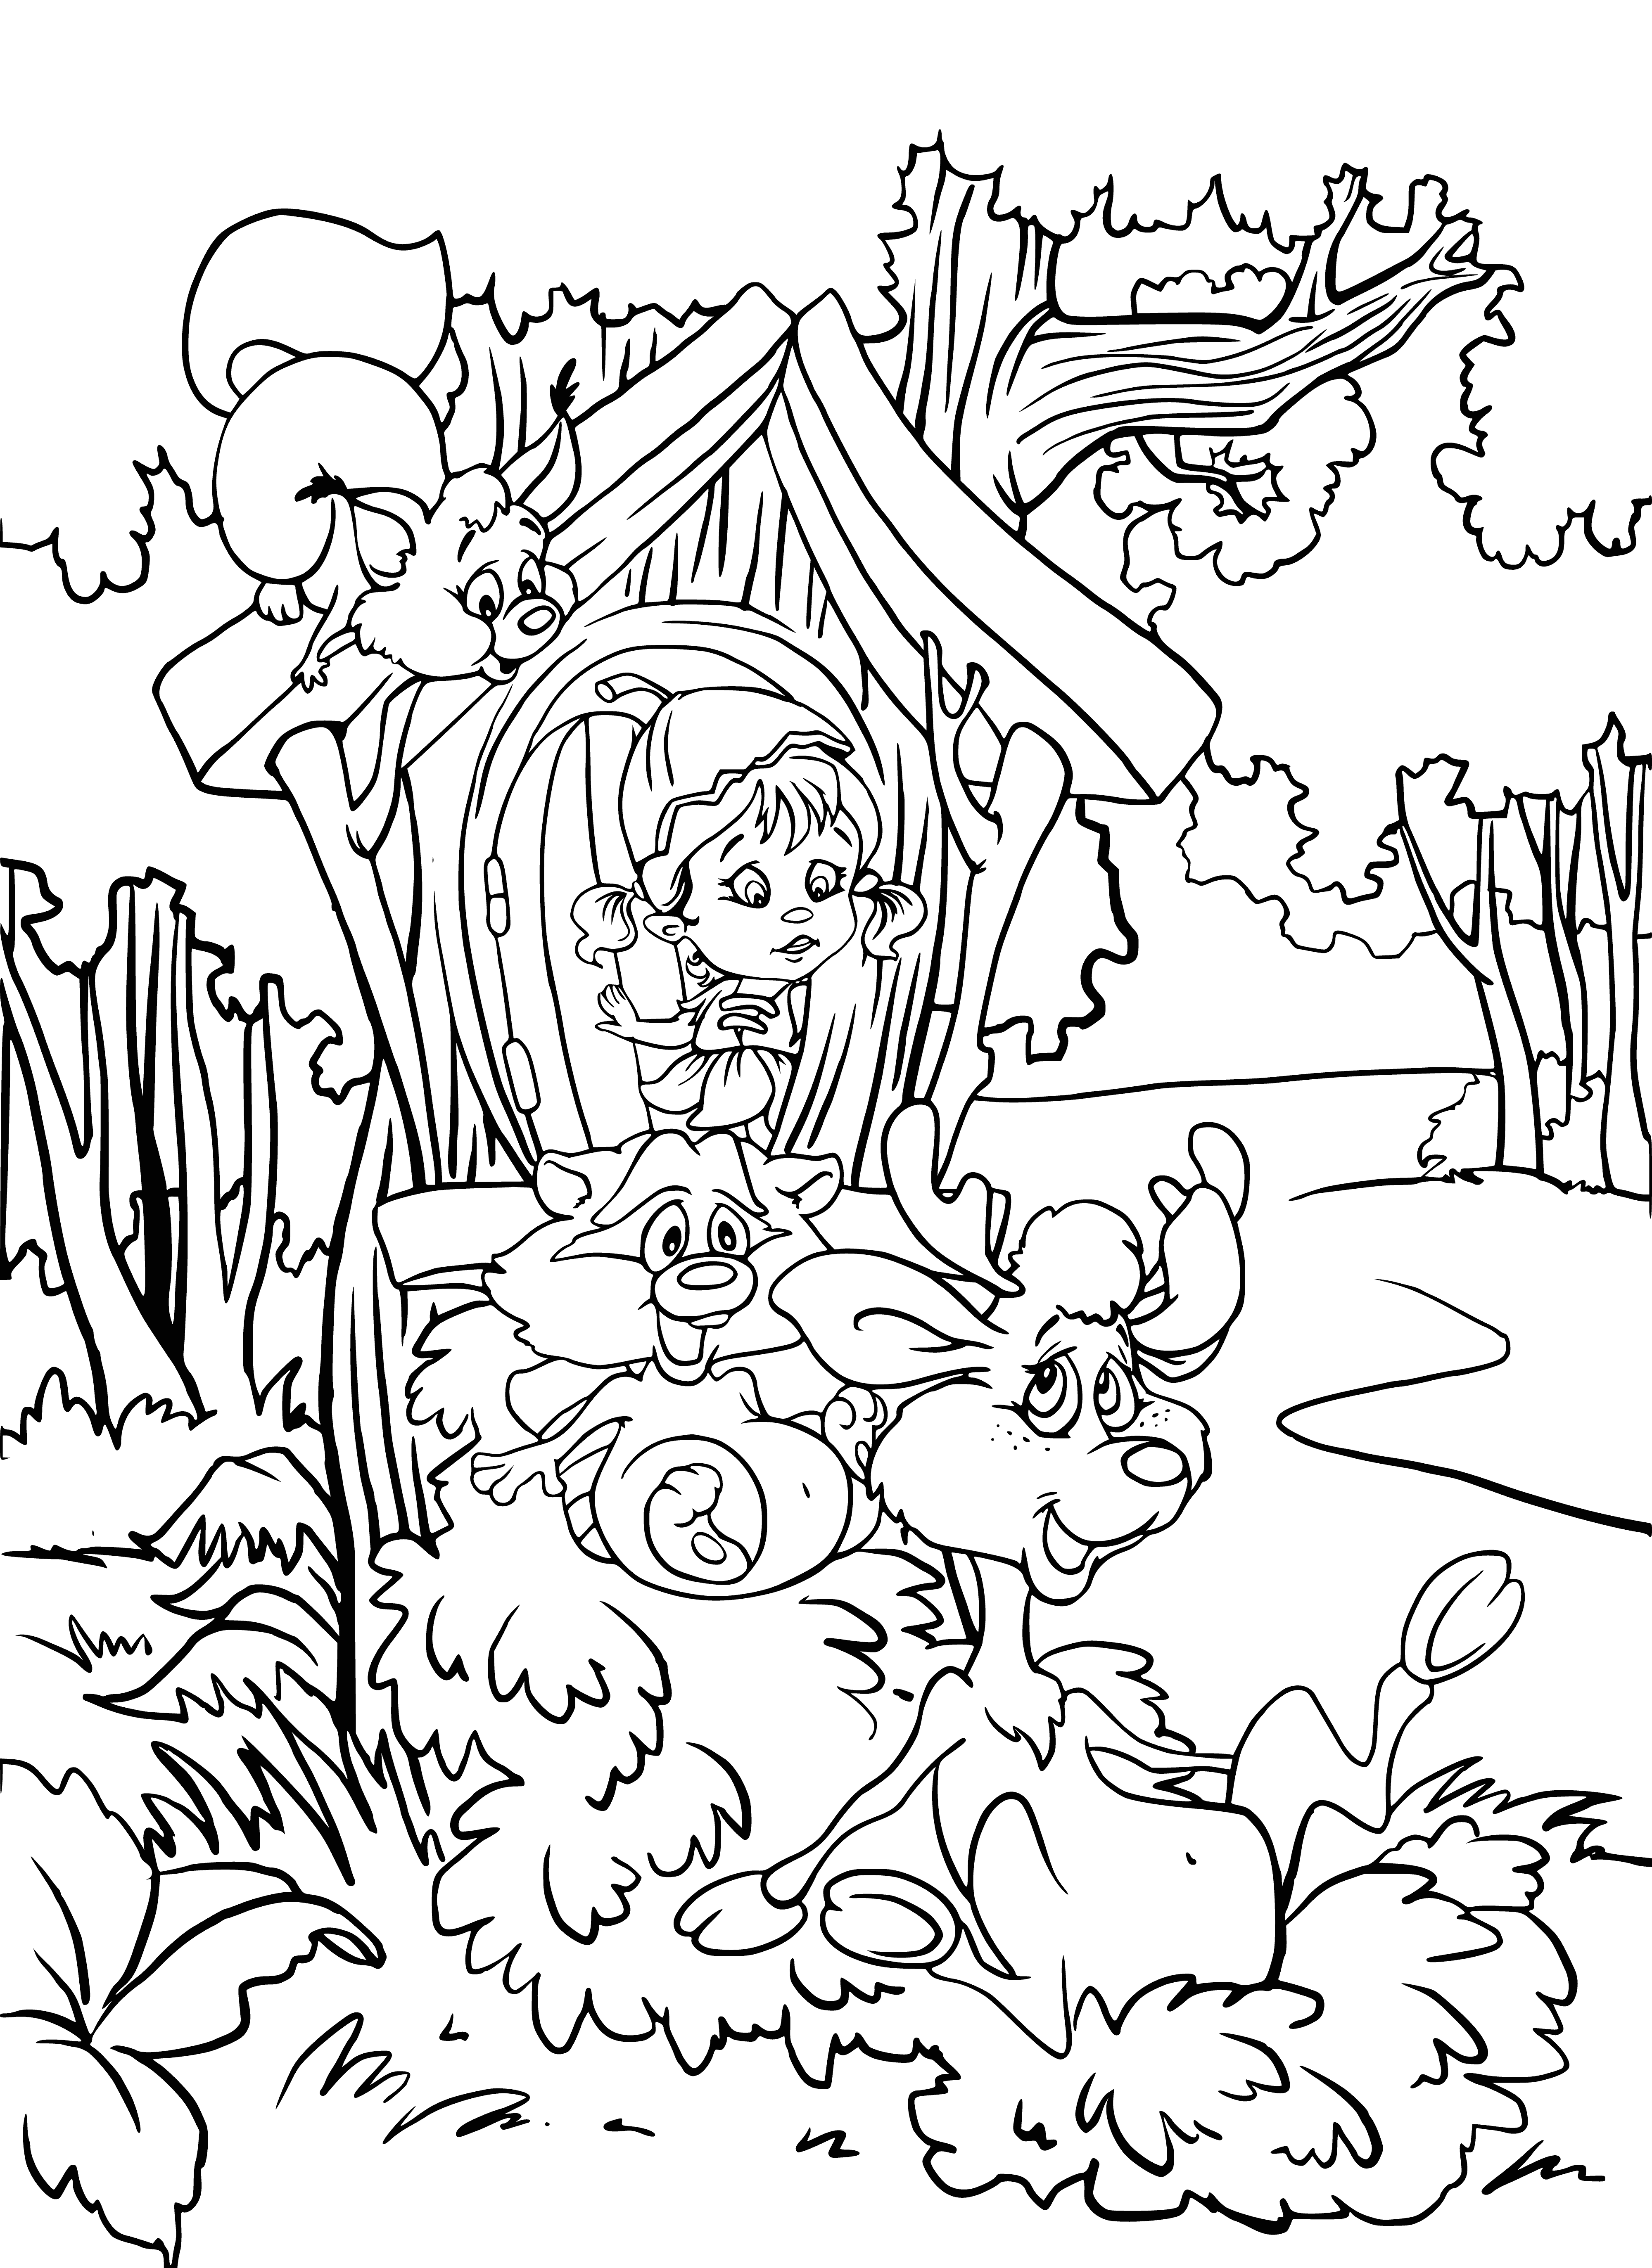 coloring page: Oreshenka & Downhill stand atop a hill, she in her red dress & white scarf, he in blue & brown. They stand near a large tree, friends in the Spring air. #springtime #friendship